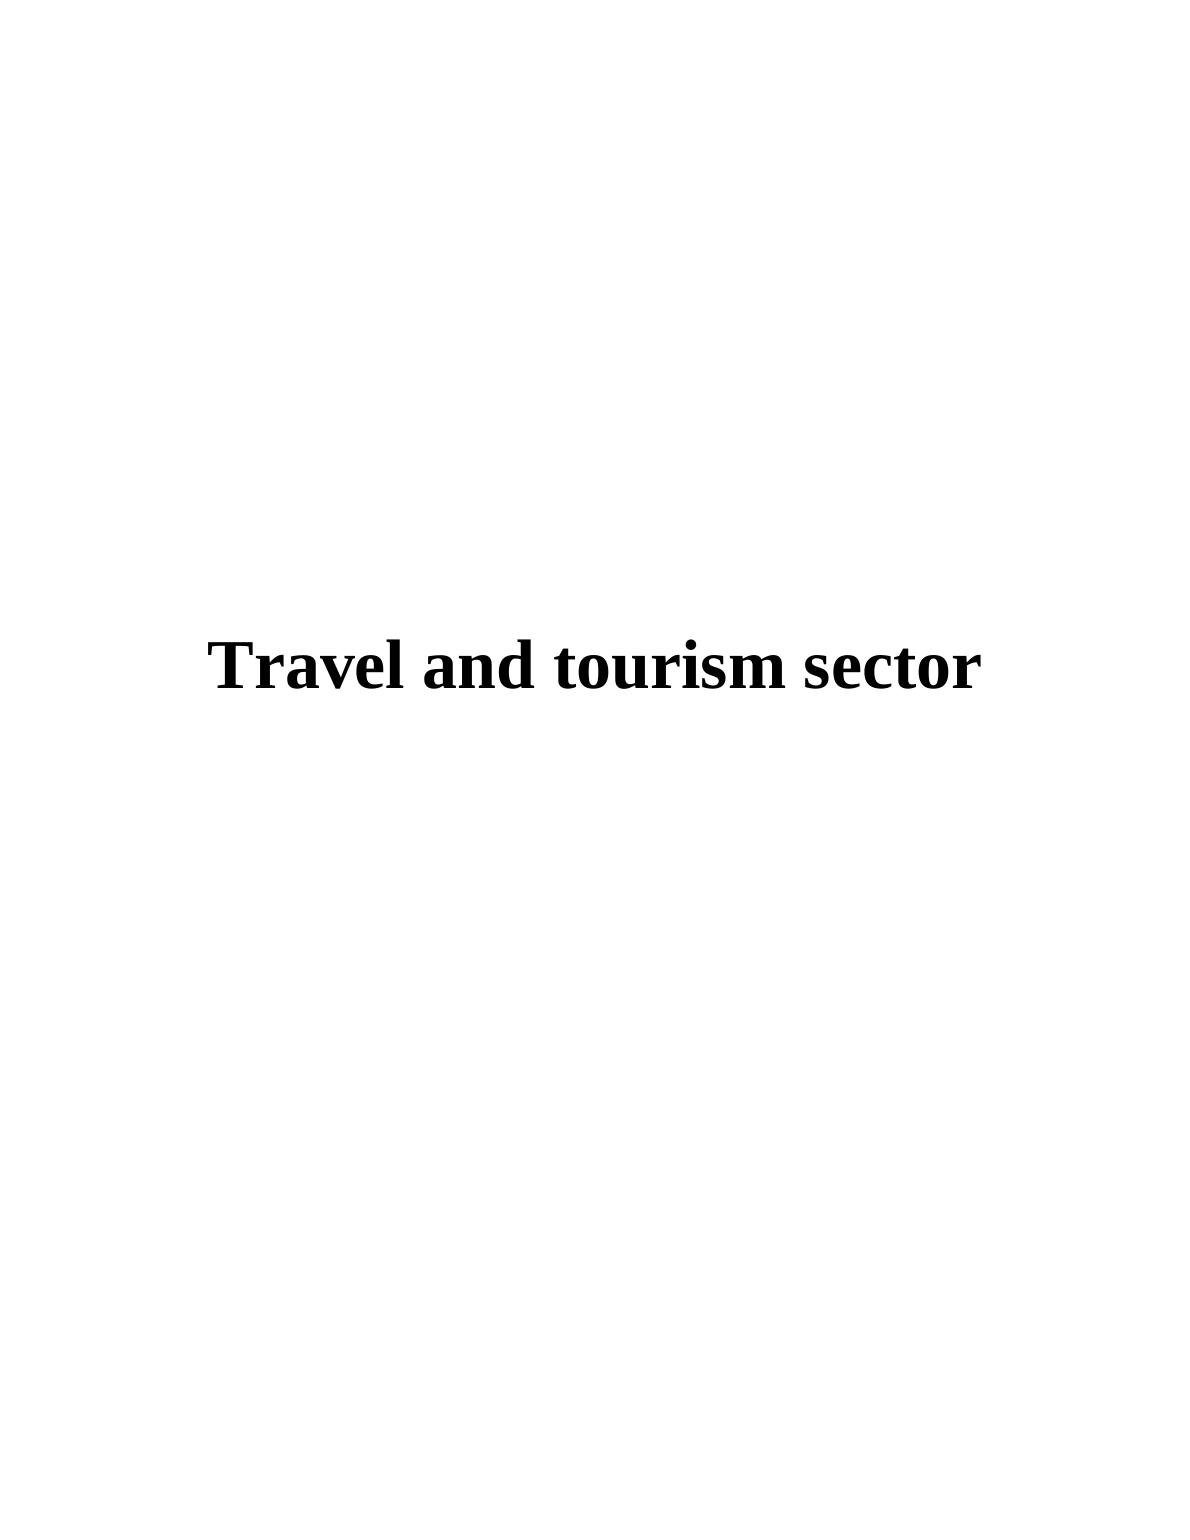 Influence of Political Change on the Travel and Tourism Sector_1